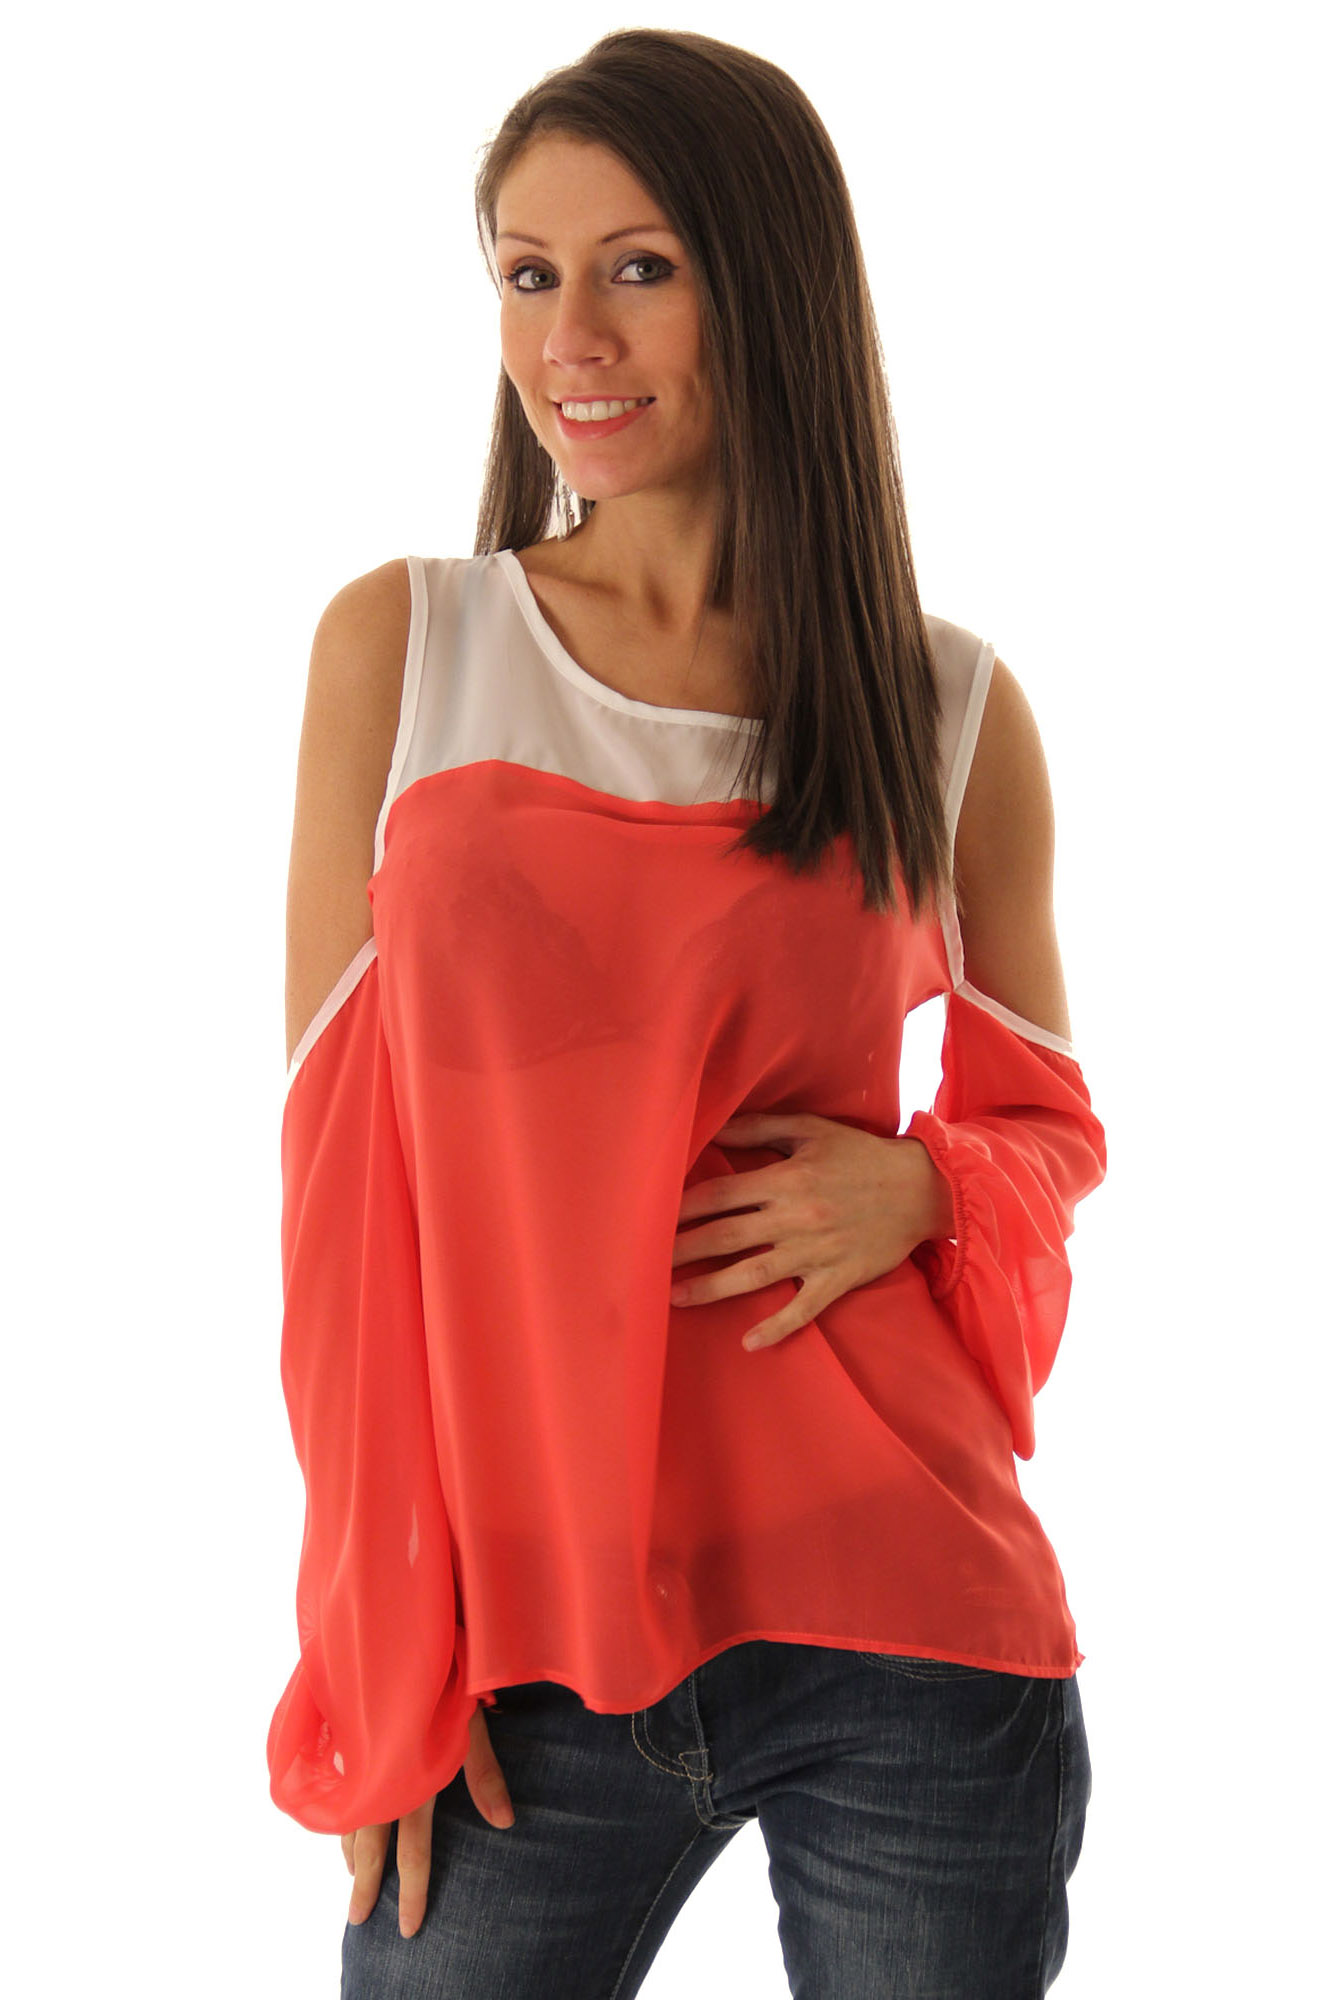 DHStyles.com DHStyles Women's Coral White Trendy Sheer Cold Shoulder Tunic Top - Medium